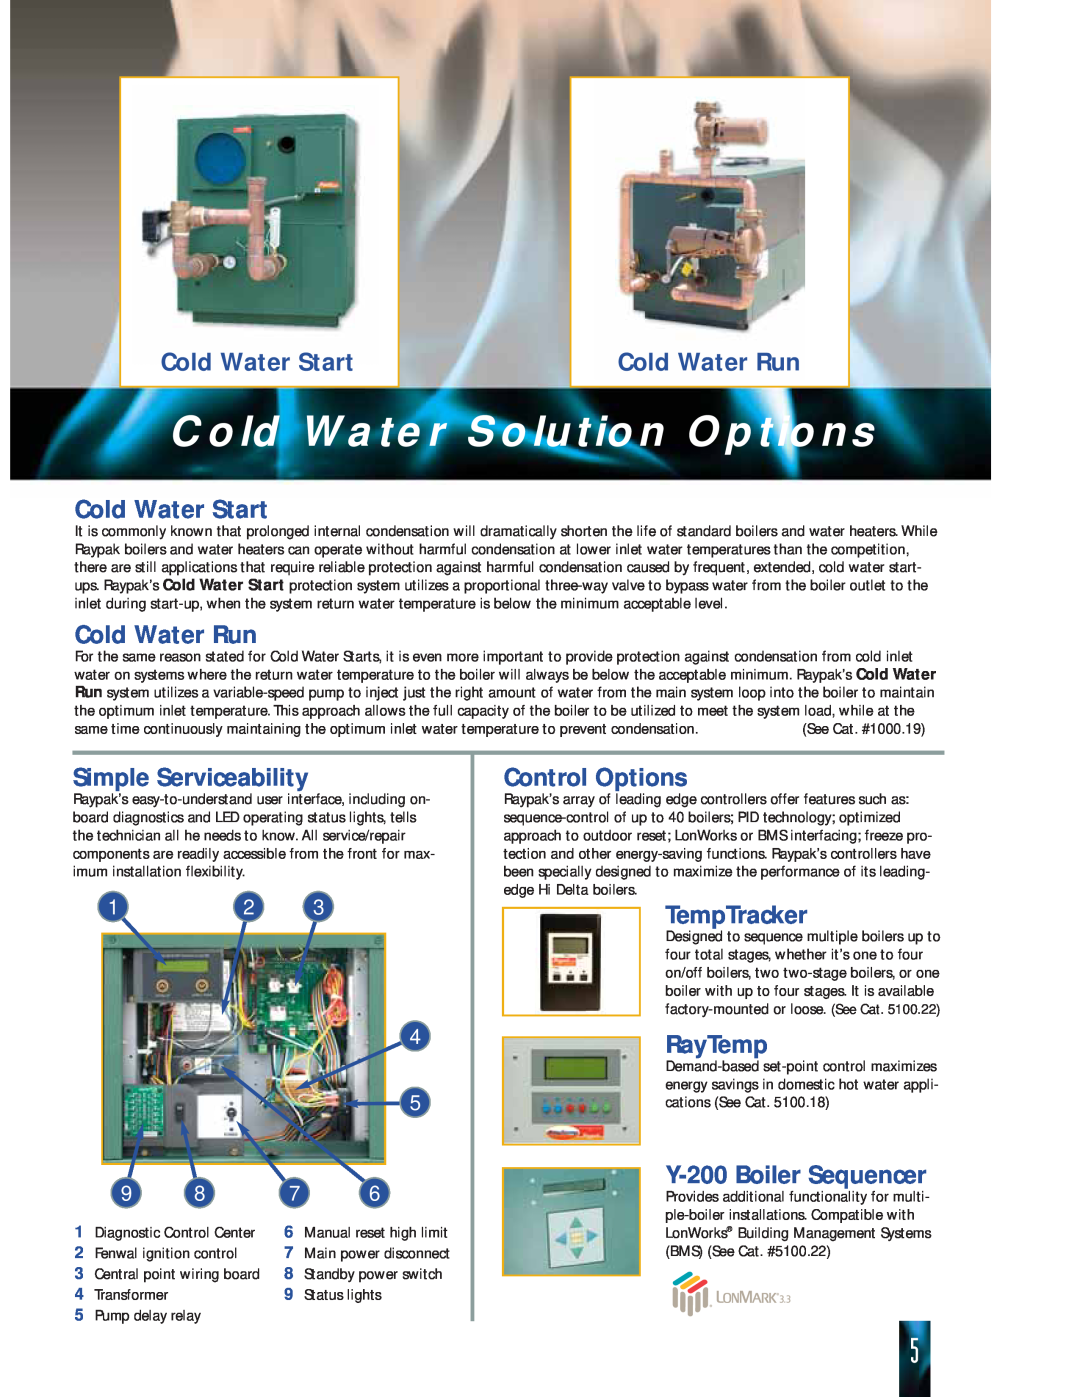 Raypak HD101 THRU 2342B Cold Water Solution Options, Cold Water Start, Cold Water Run, Simple Serviceability, TempTracker 